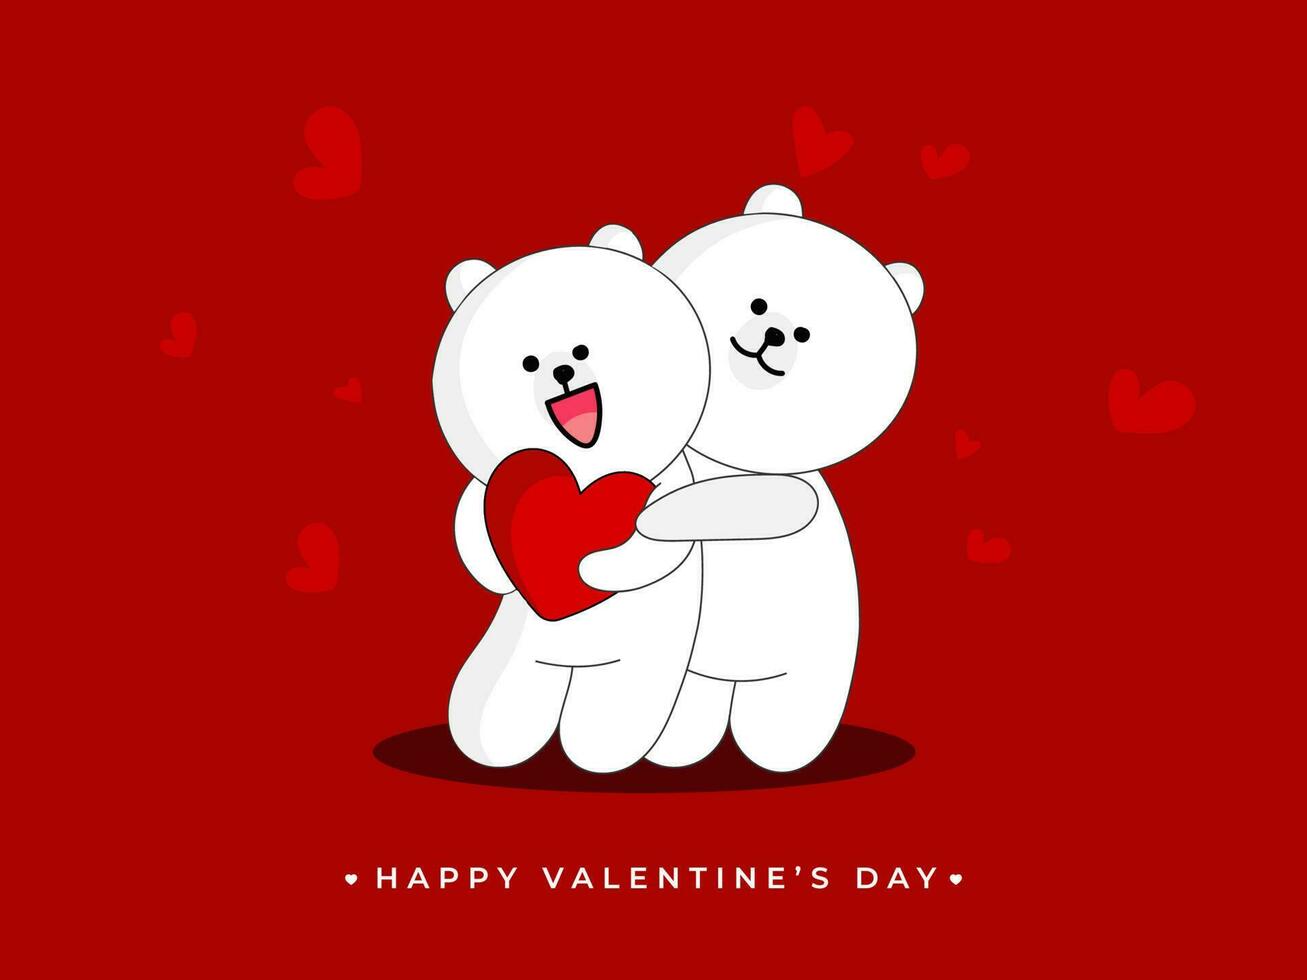 Loving Cartoon Bear Couple holding Hearts on Red Background for Happy Valentine's Day Celebration Concept. vector